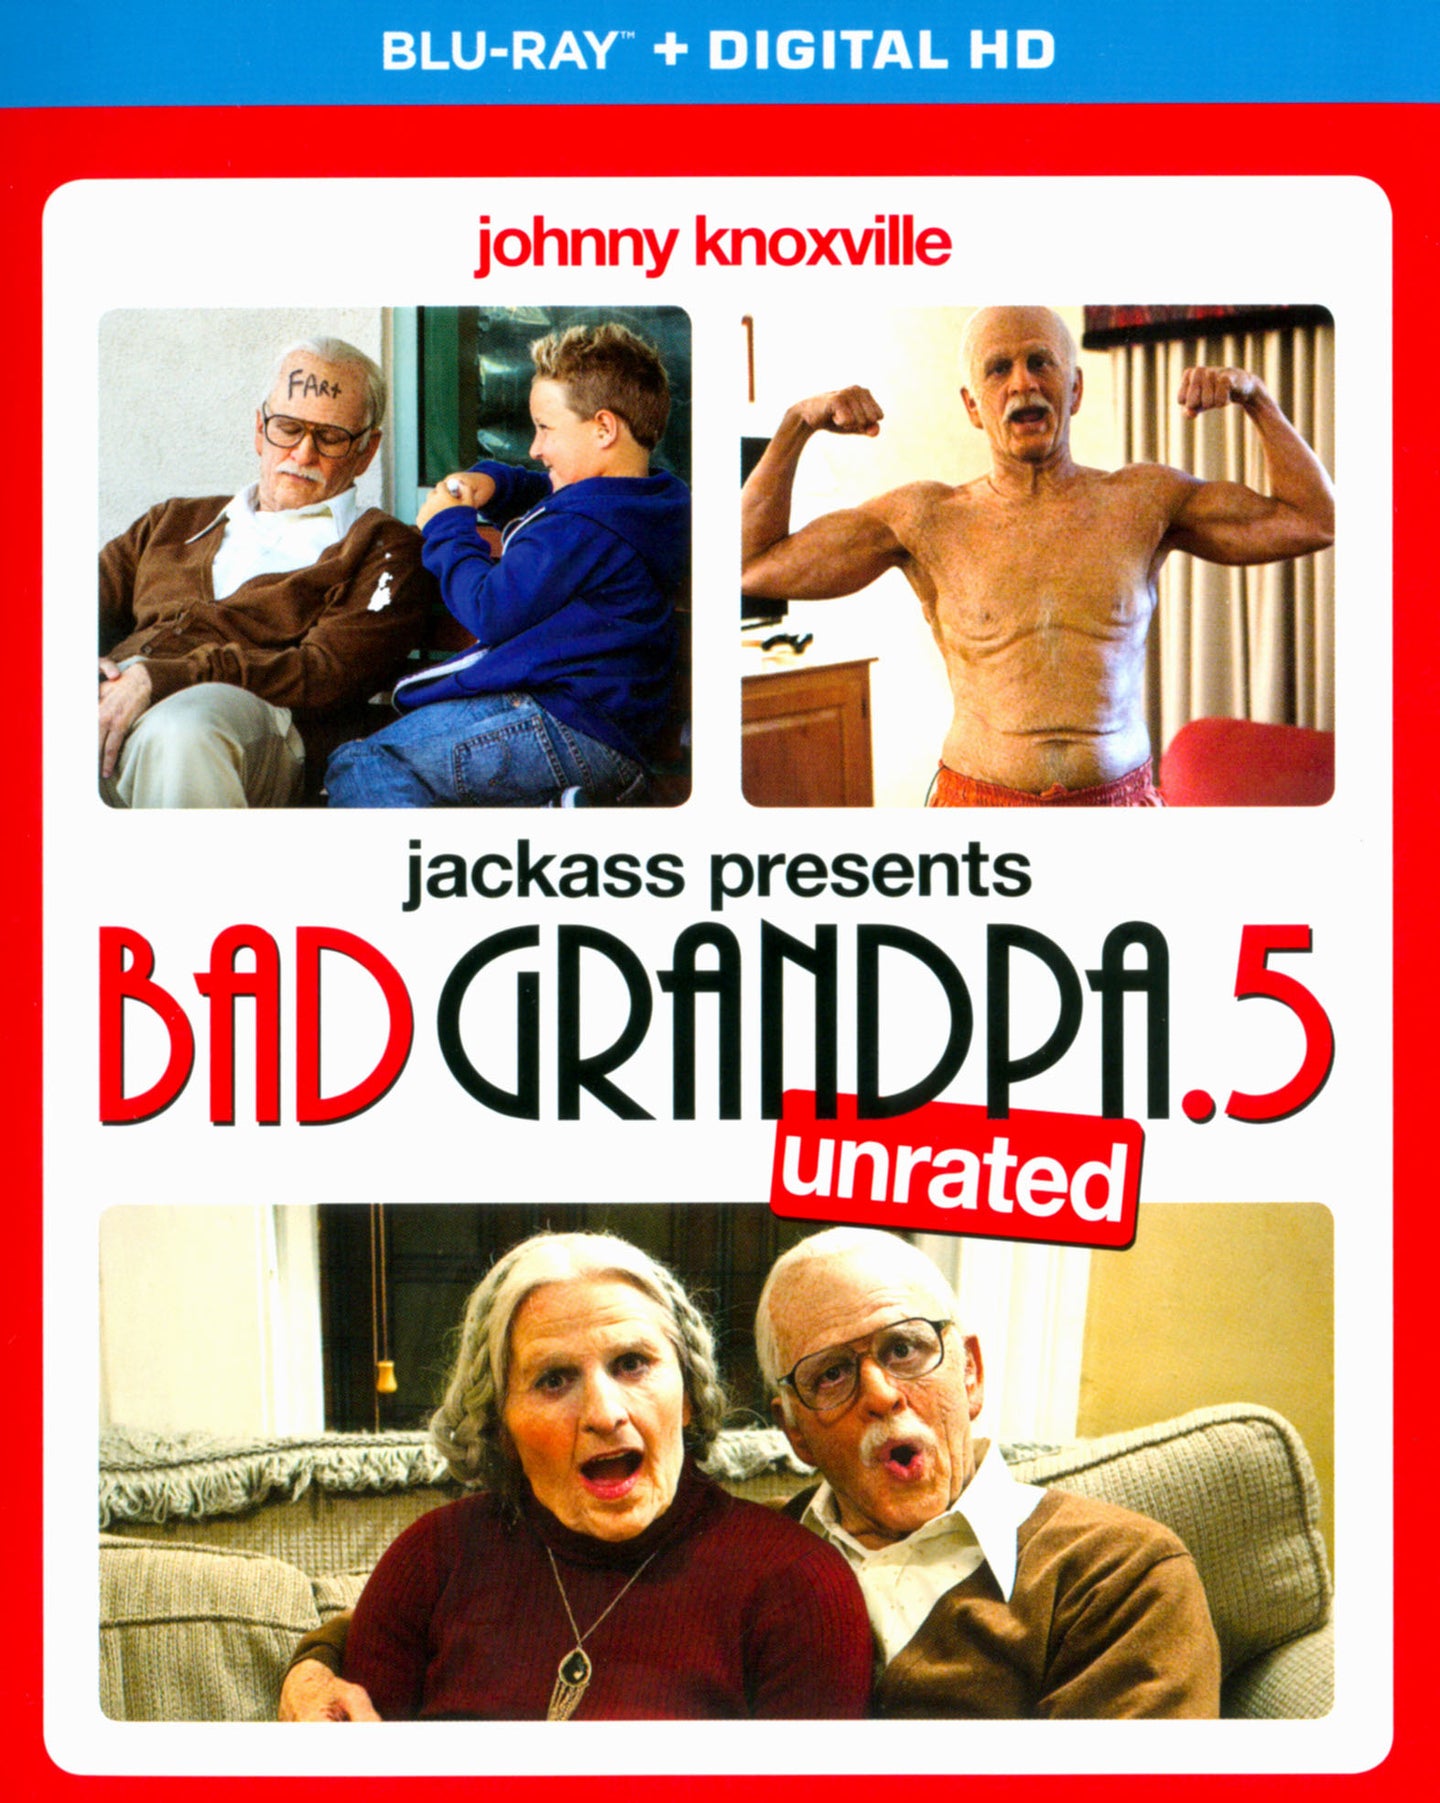 Bad Grandpa .5 (2014) iTunes HD redemption only